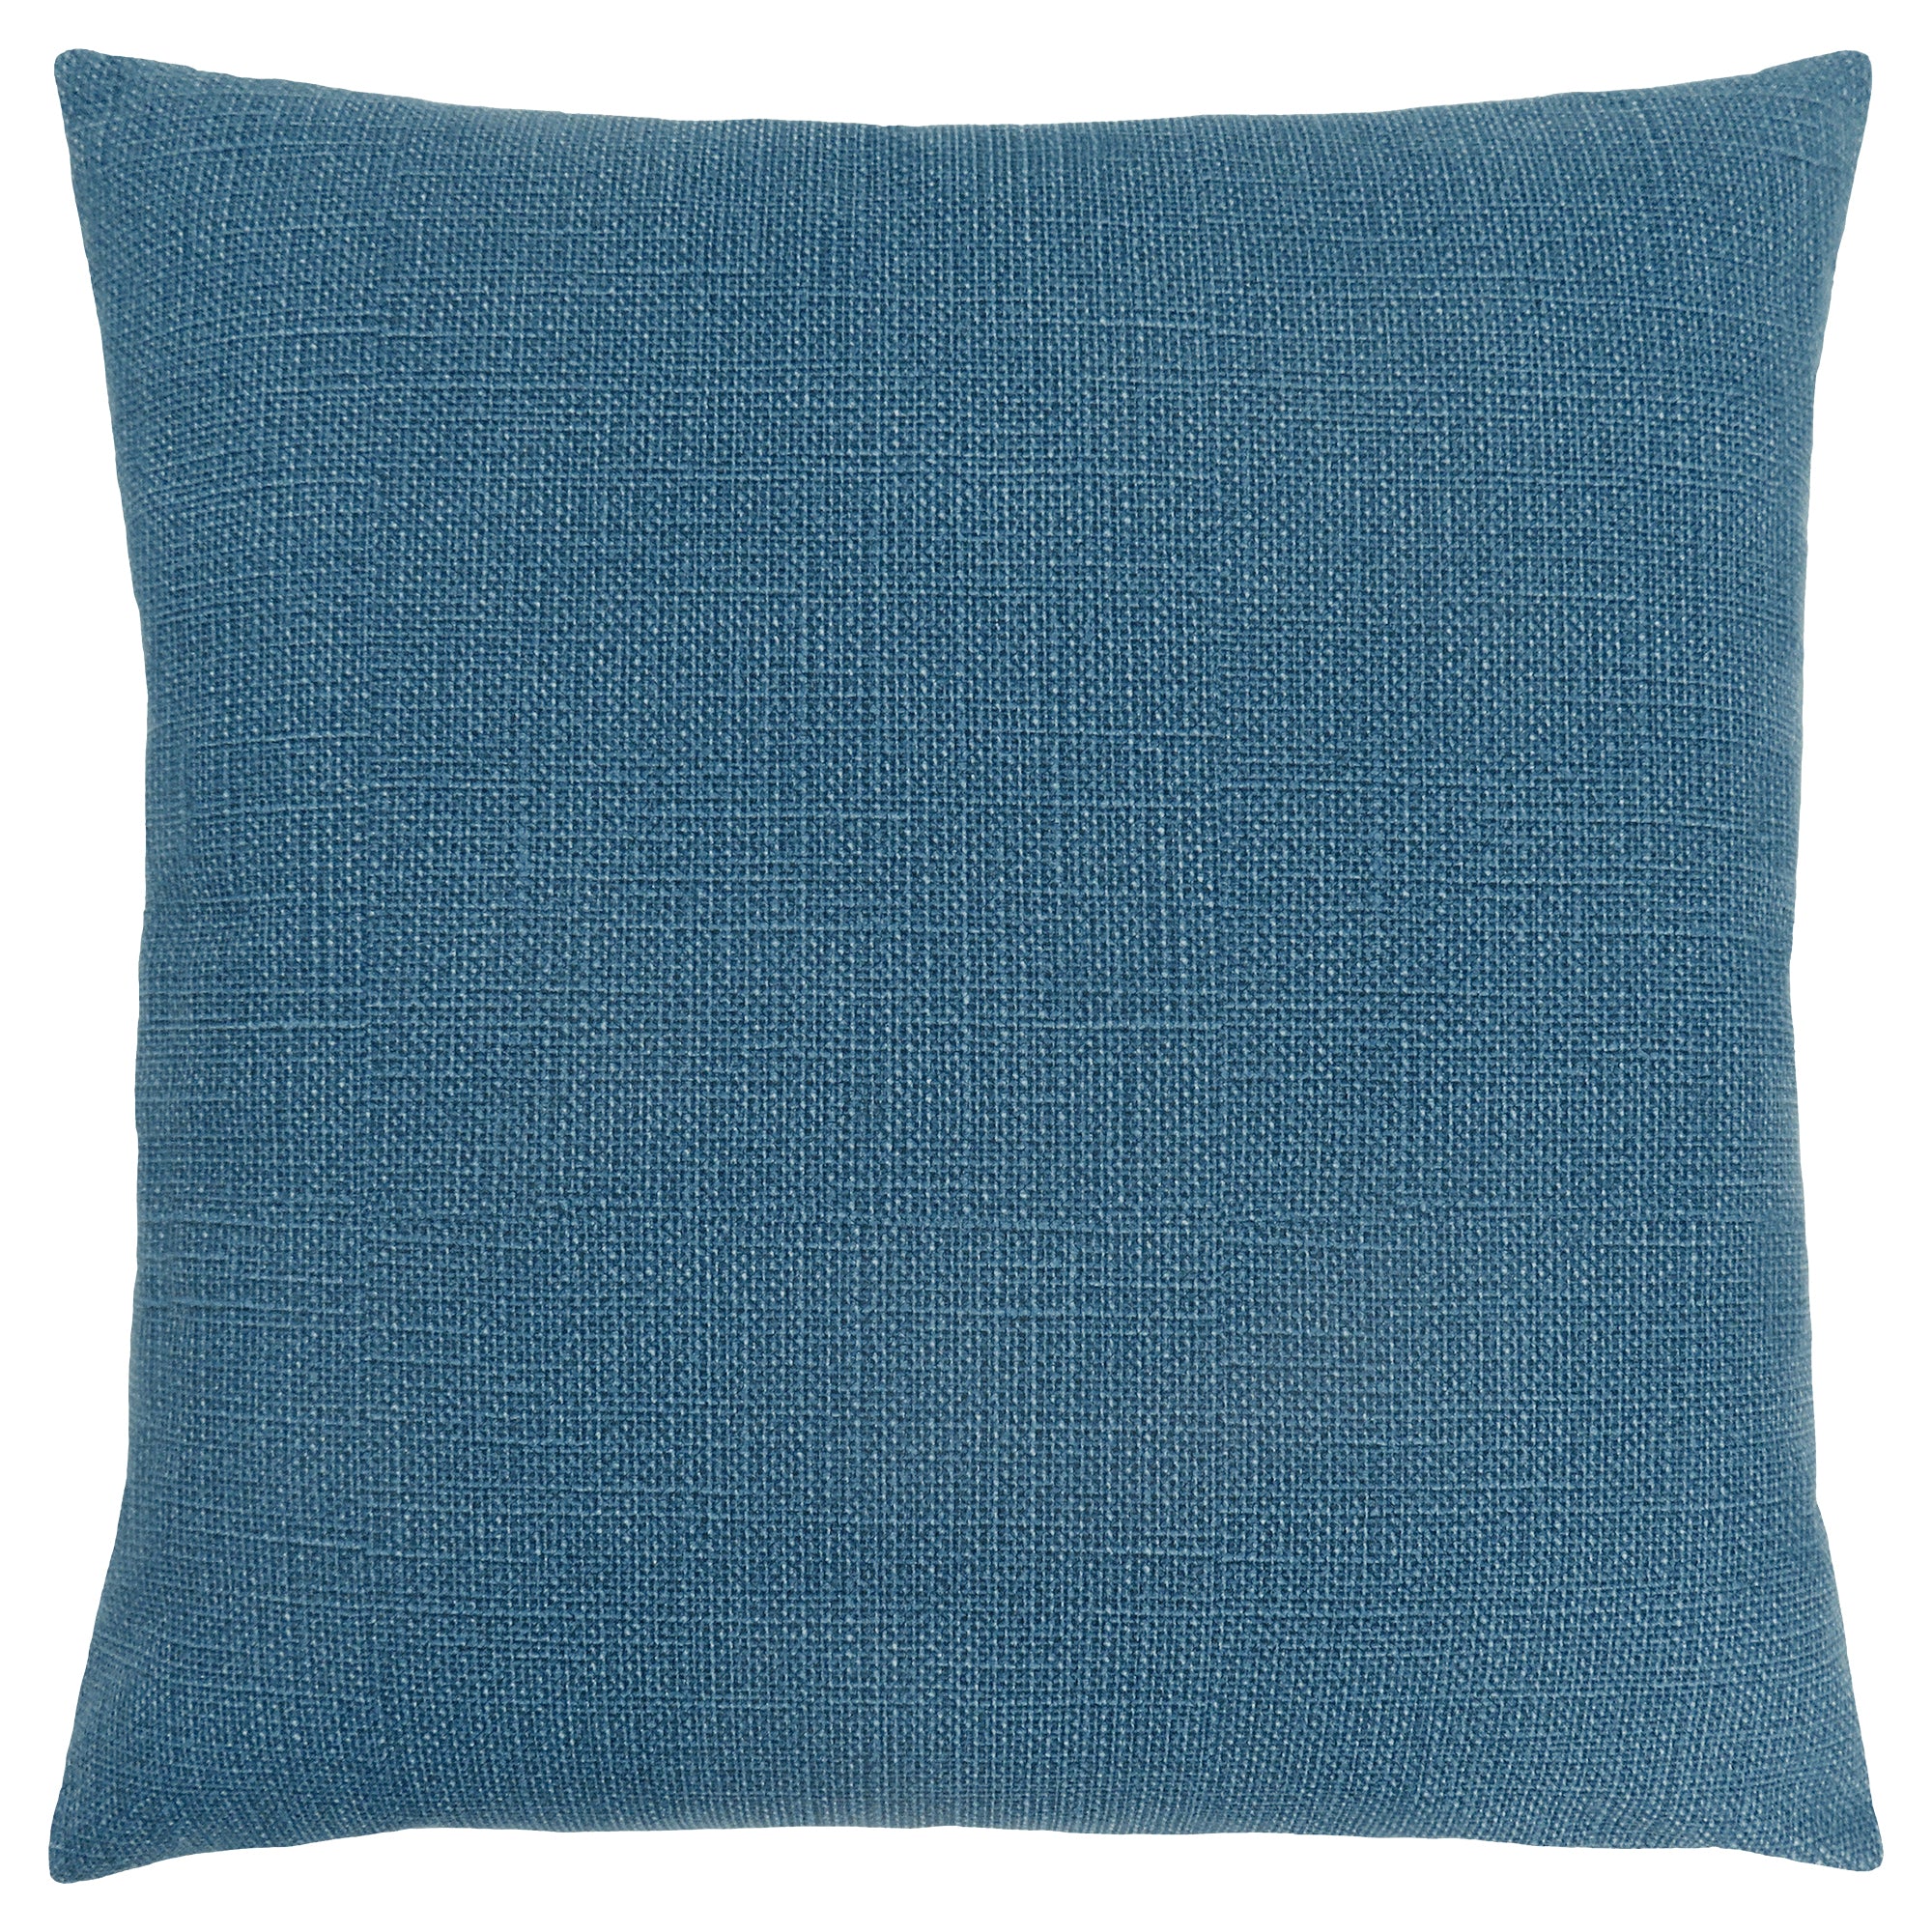 Pillow - 18X 18 / Patterned Blue / 1Pc